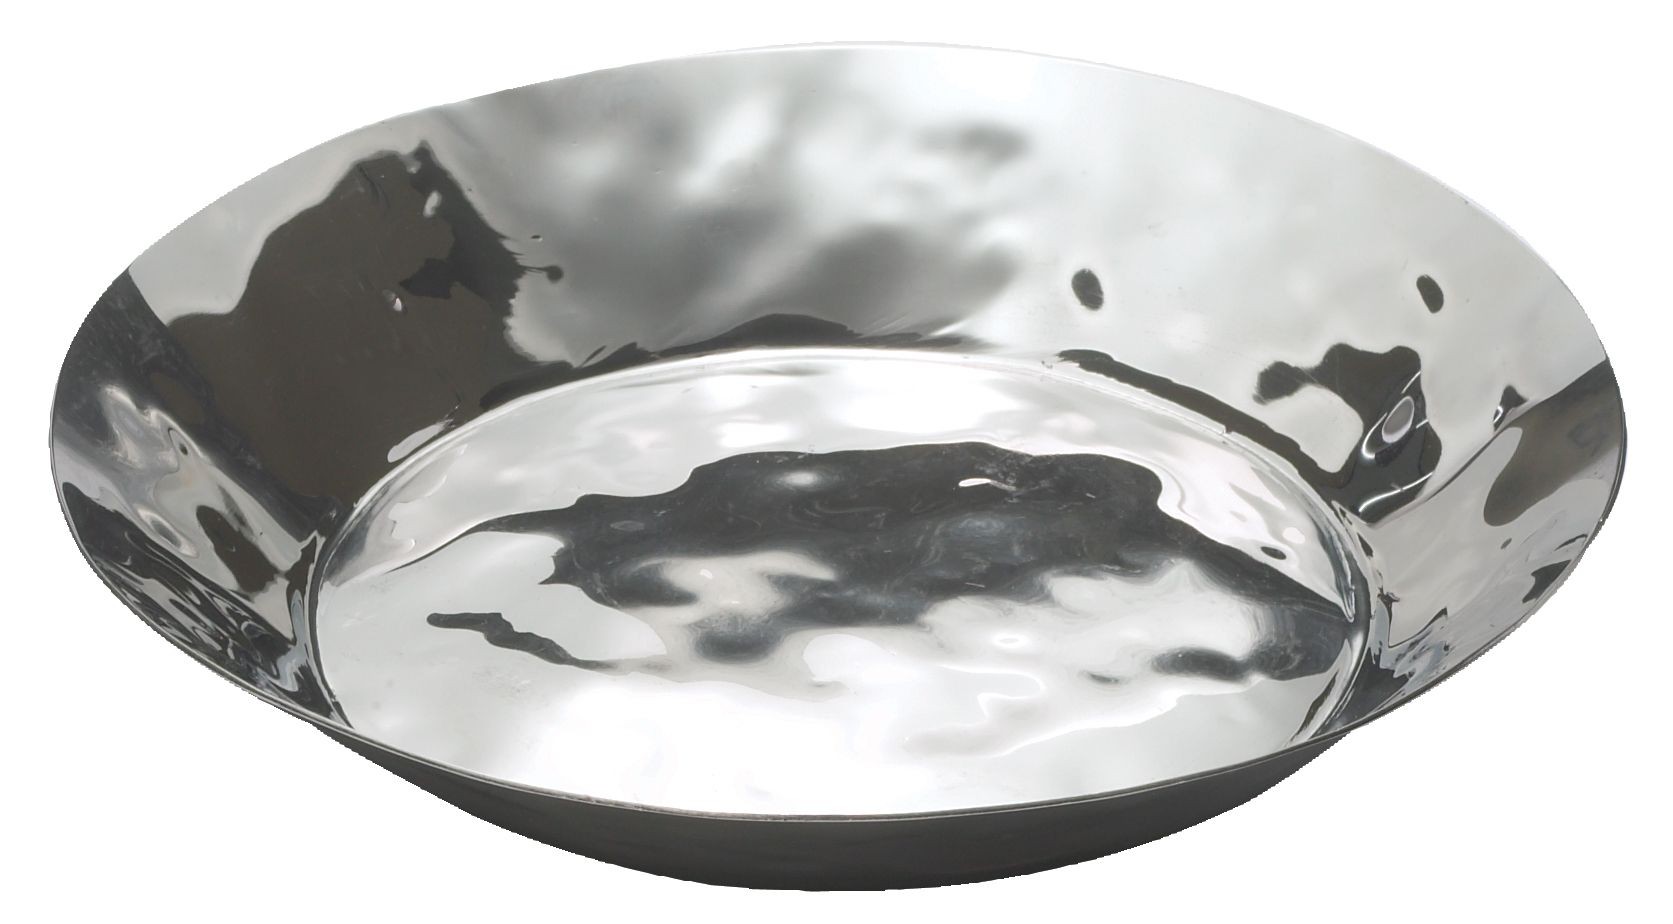 Winco HPR-10 Hammered Steel Round Serving / Display Tray, 10-1/4" Dia. x 1-5/8" H